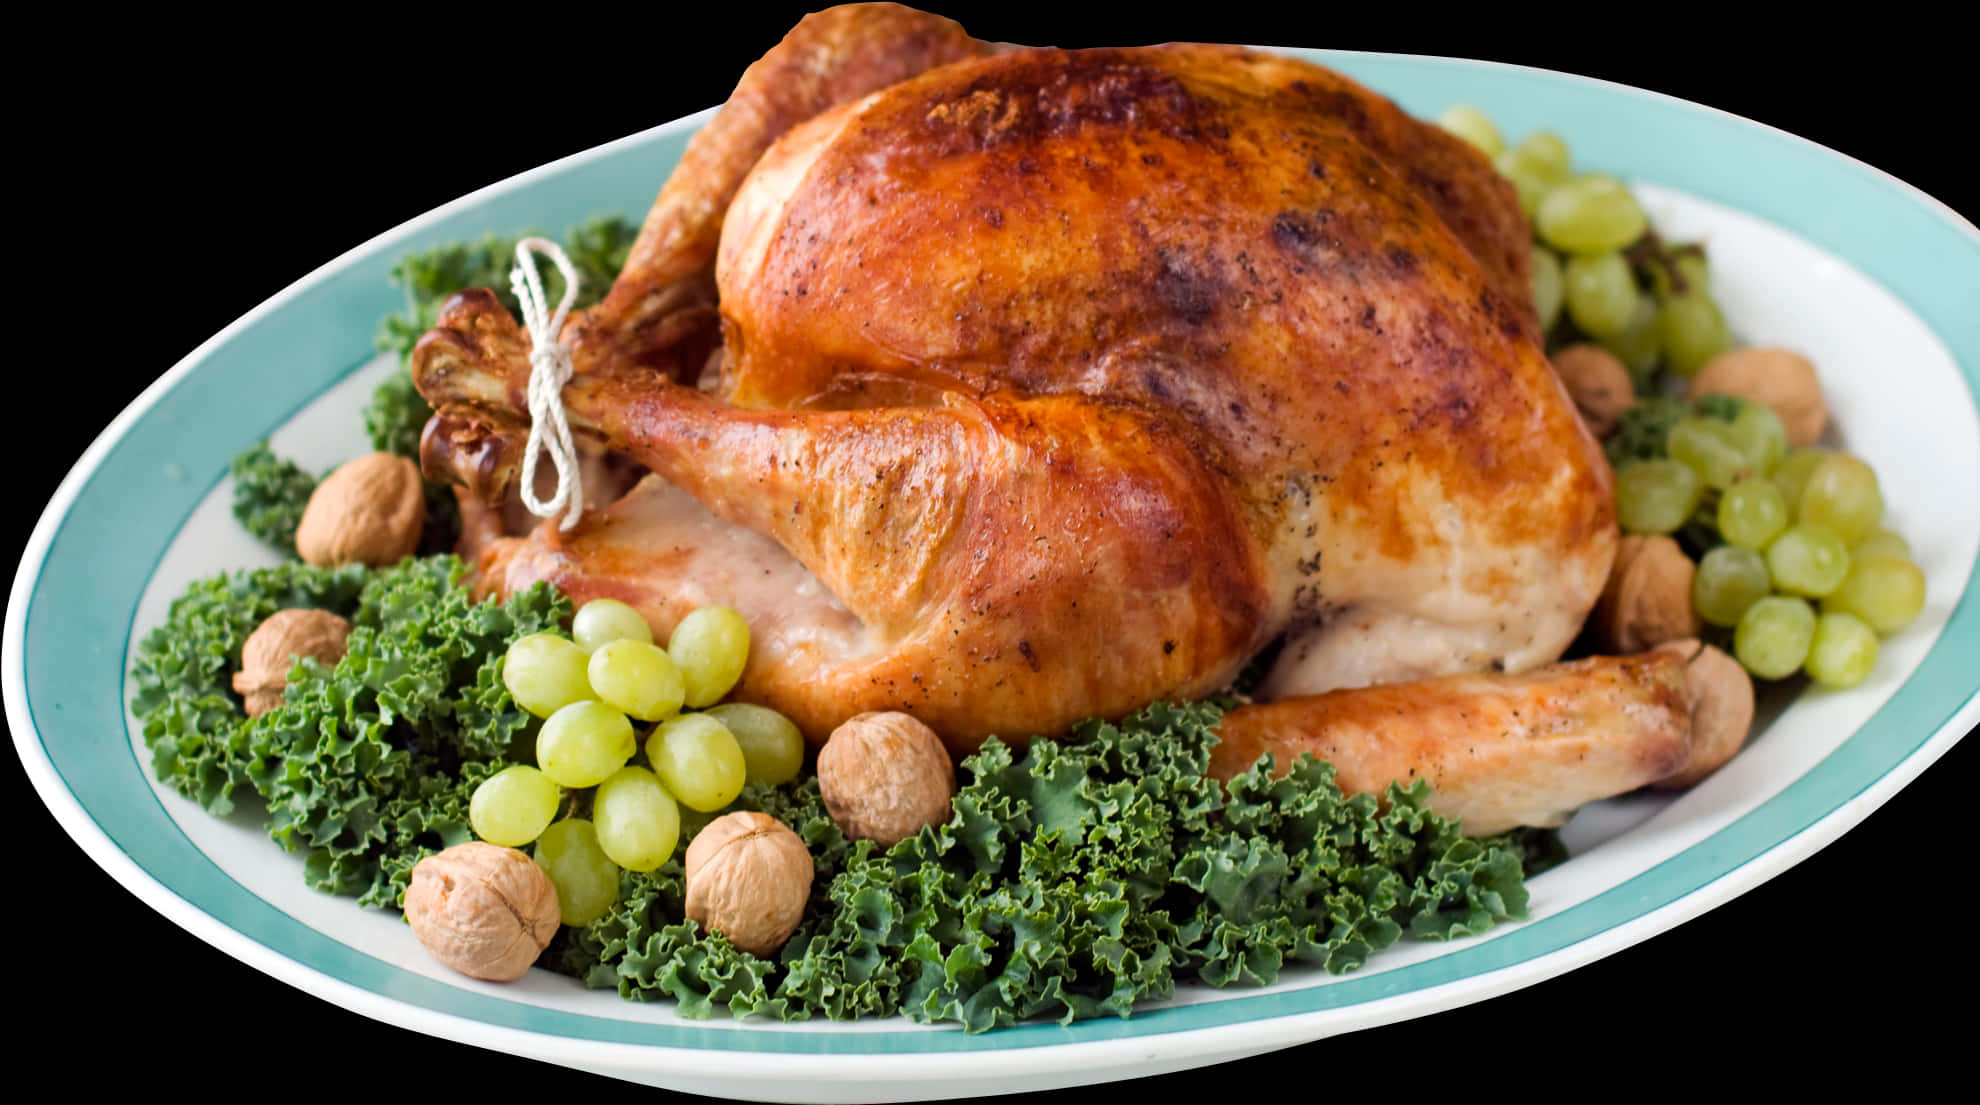 A Turkey On A Plate With Grapes And Kale